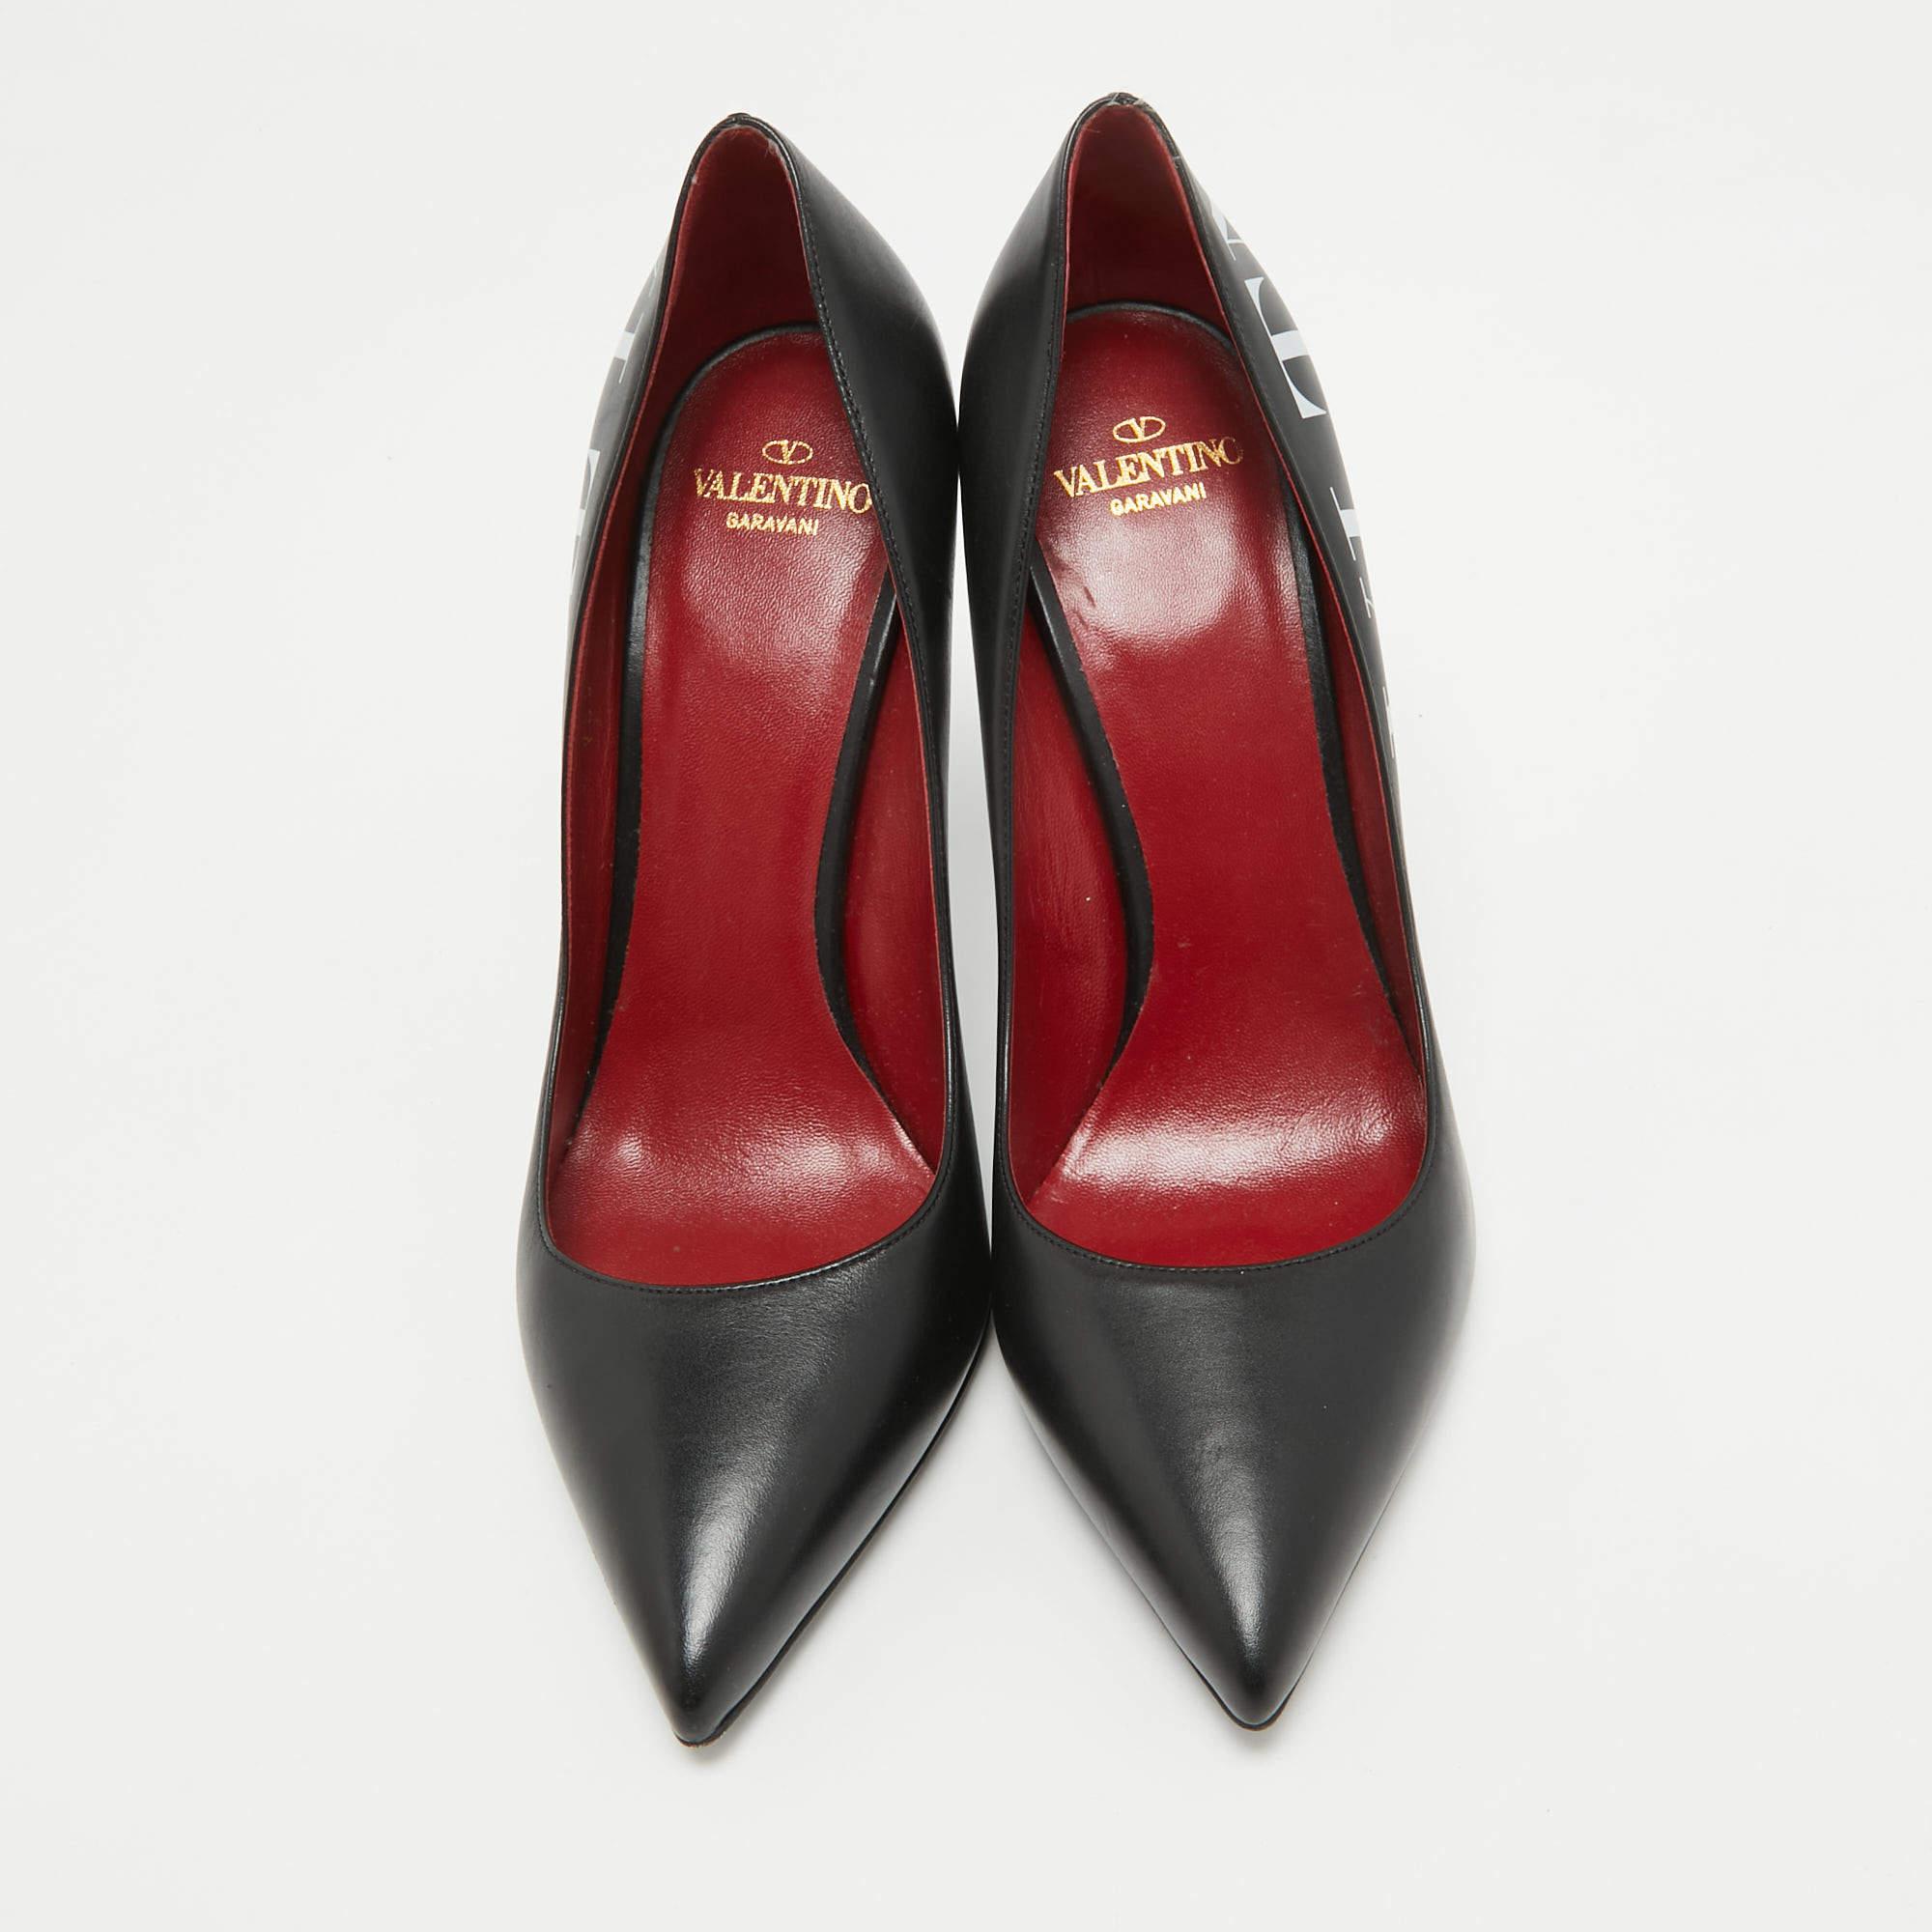 The fashion house’s tradition of excellence, coupled with modern design sensibilities, works to make these VLTN pumps a fabulous choice. They'll help you deliver a chic look with ease.

Includes: Original Dustbag, Extra Heel Tips, Info Booklet

